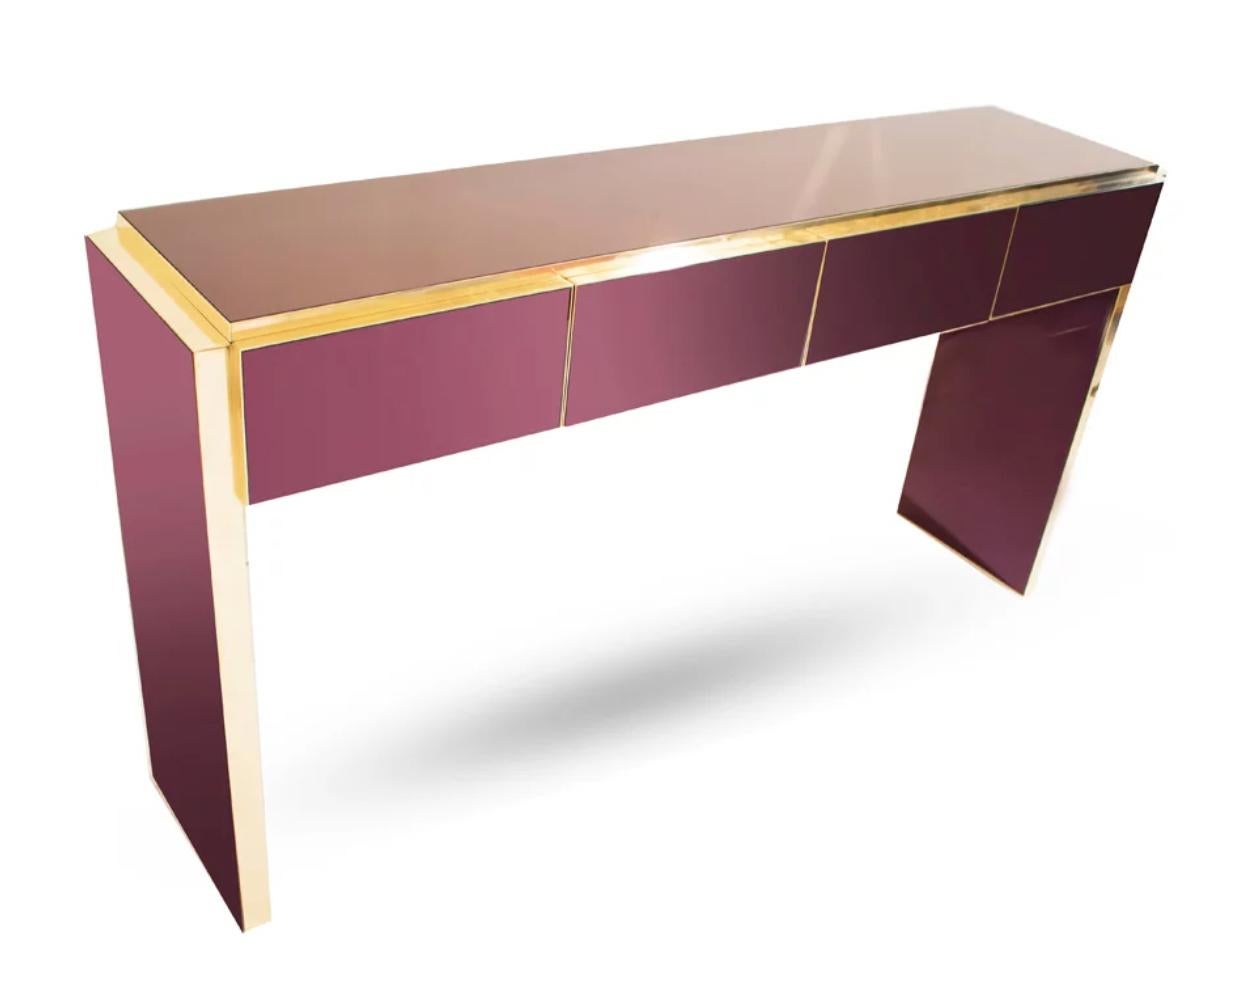 Contemporary Bespoke customizable 4-drawer modern console / sideboard, refinished also on the back has a unique and unusual metalic wine color with a back note of dark purple that cannot be repeated.
However, this design entirely handcrafted in